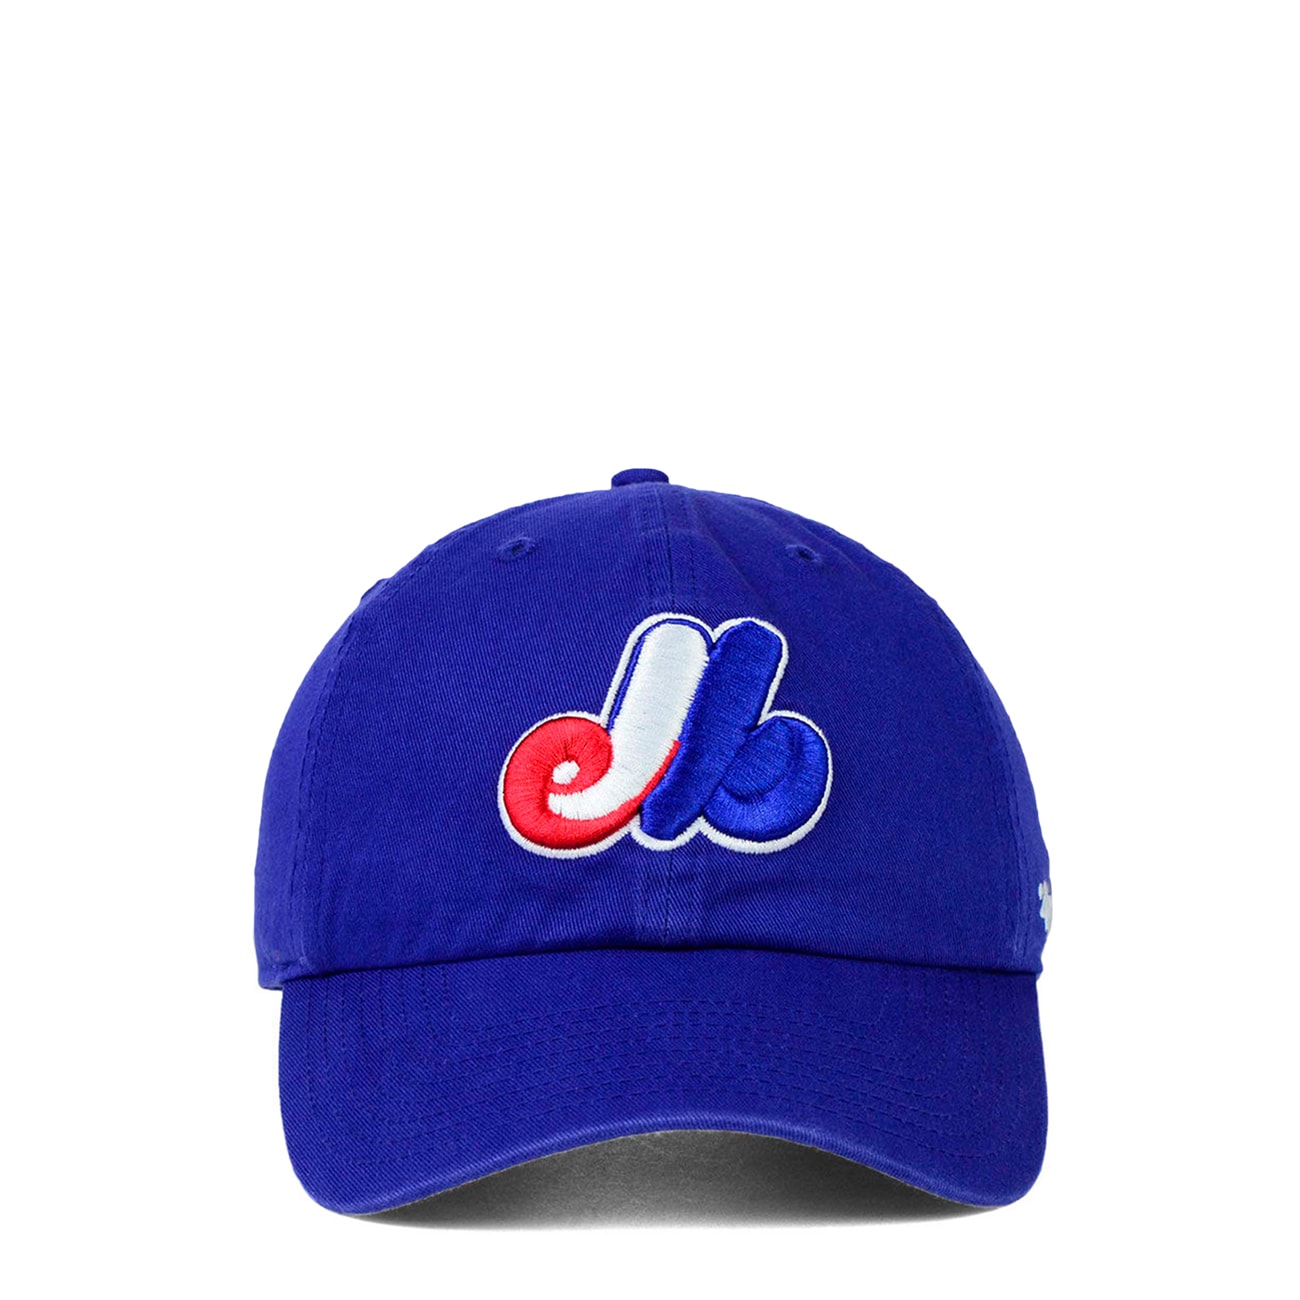 Montreal Expos 47 Brand YOUTH Blue Dark Twig Performance Adjustable Hat Cap